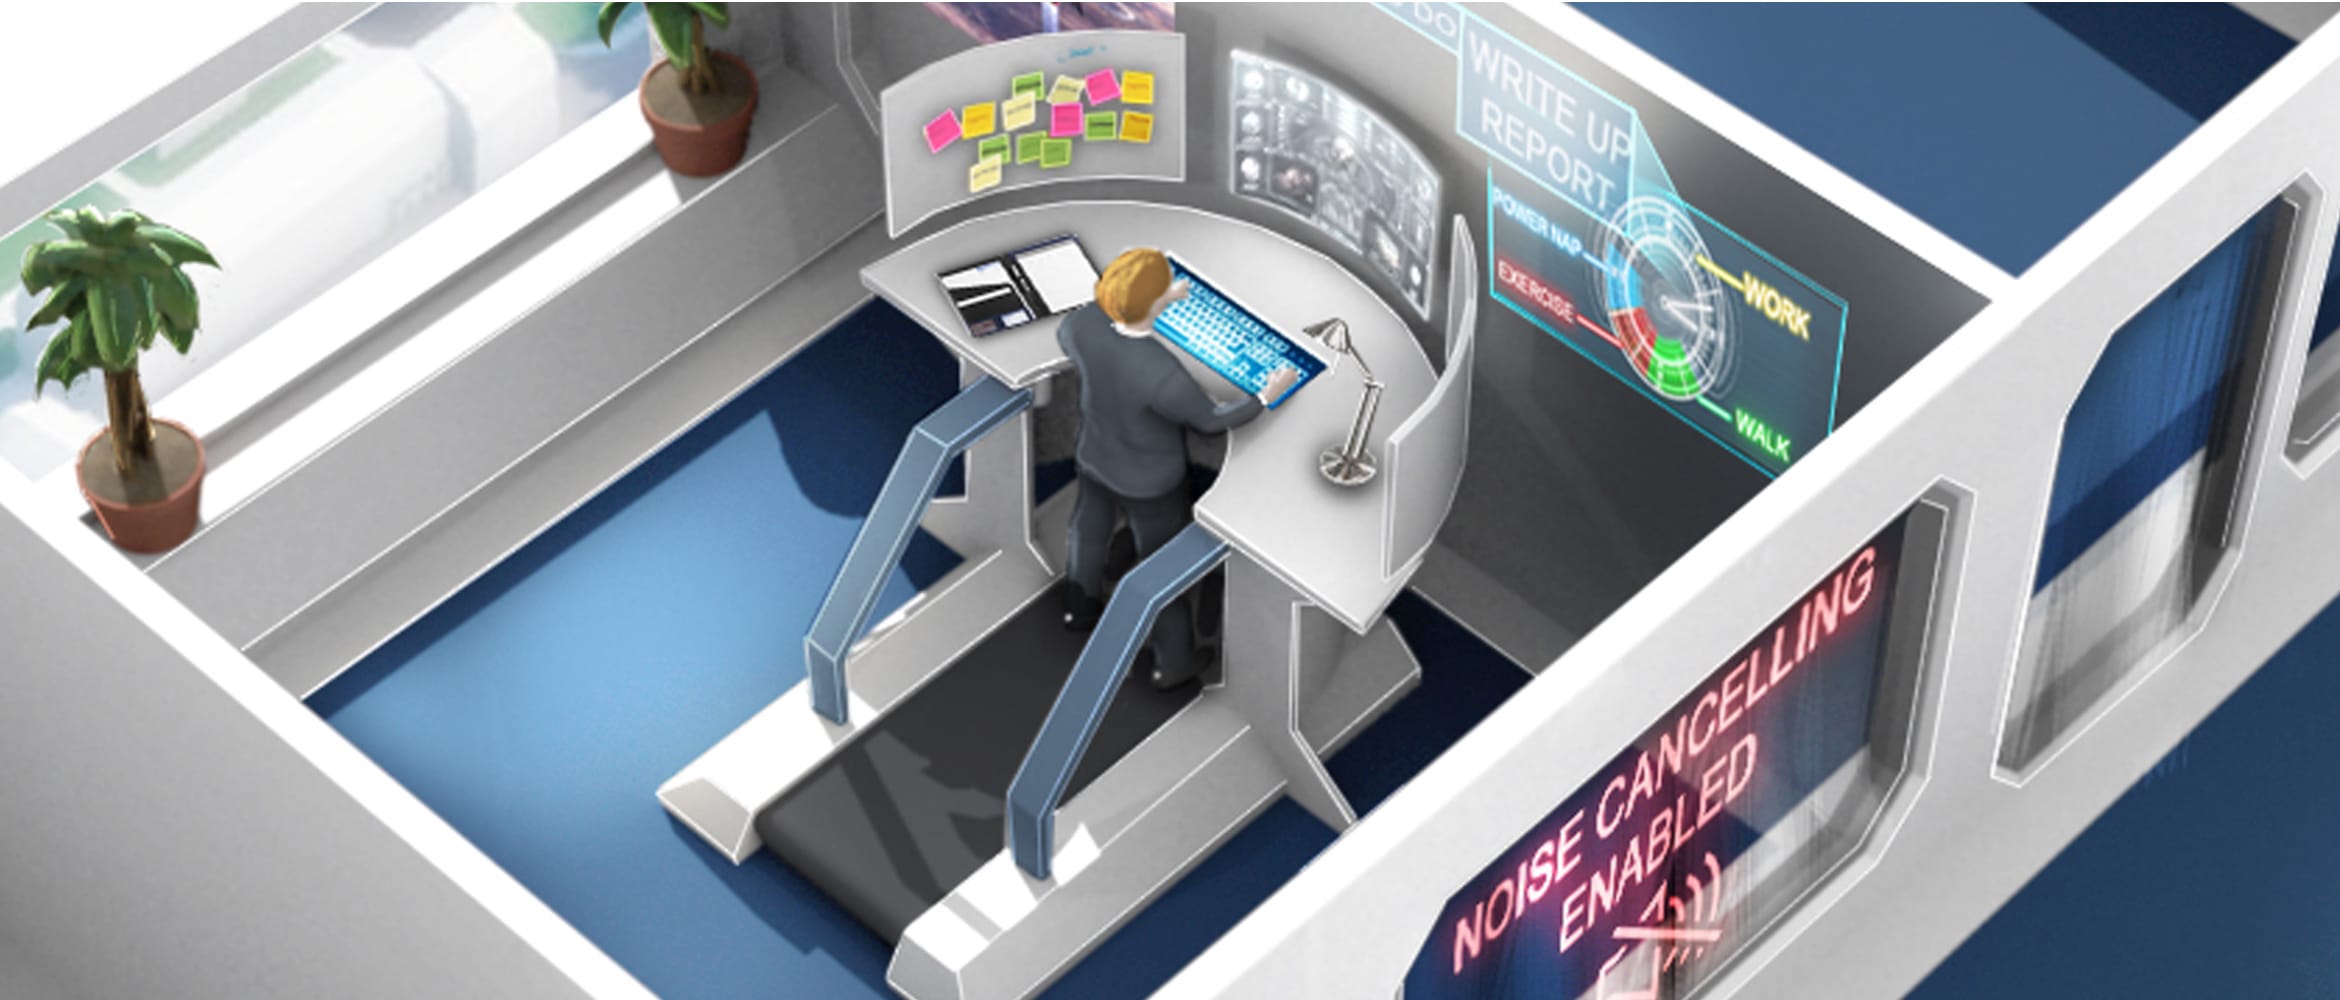 Illustration of the future of the office with anti-distraction tech designed for focus